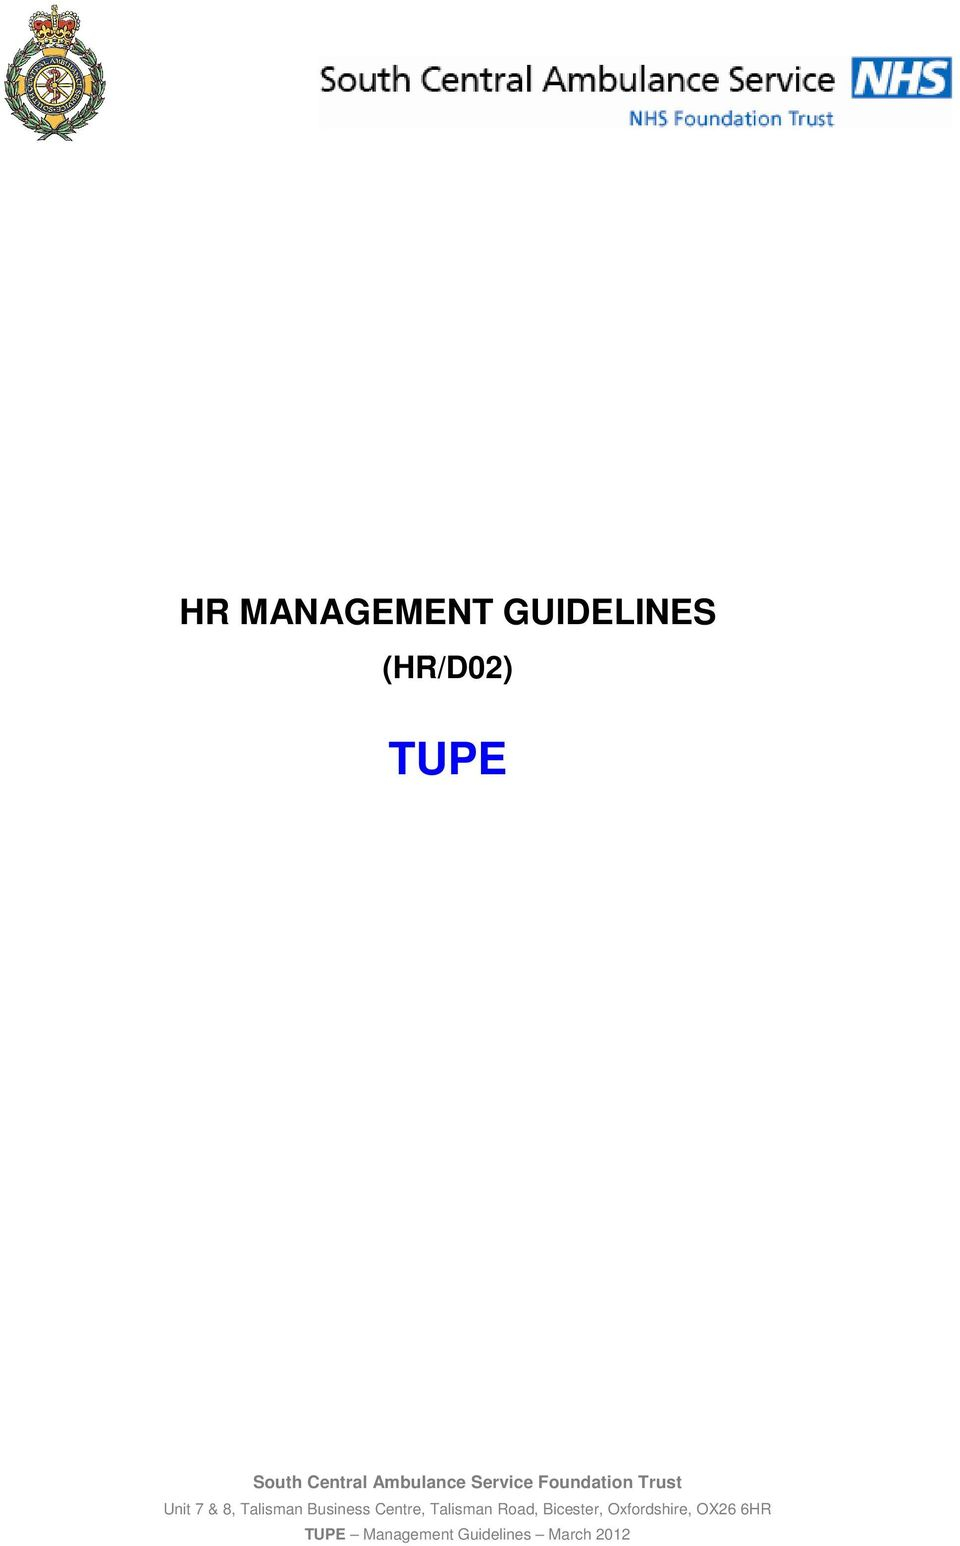 Tupe Due Diligence Spreadsheet In Hr Management Guidelines Hr/d02 Tupe  Pdf